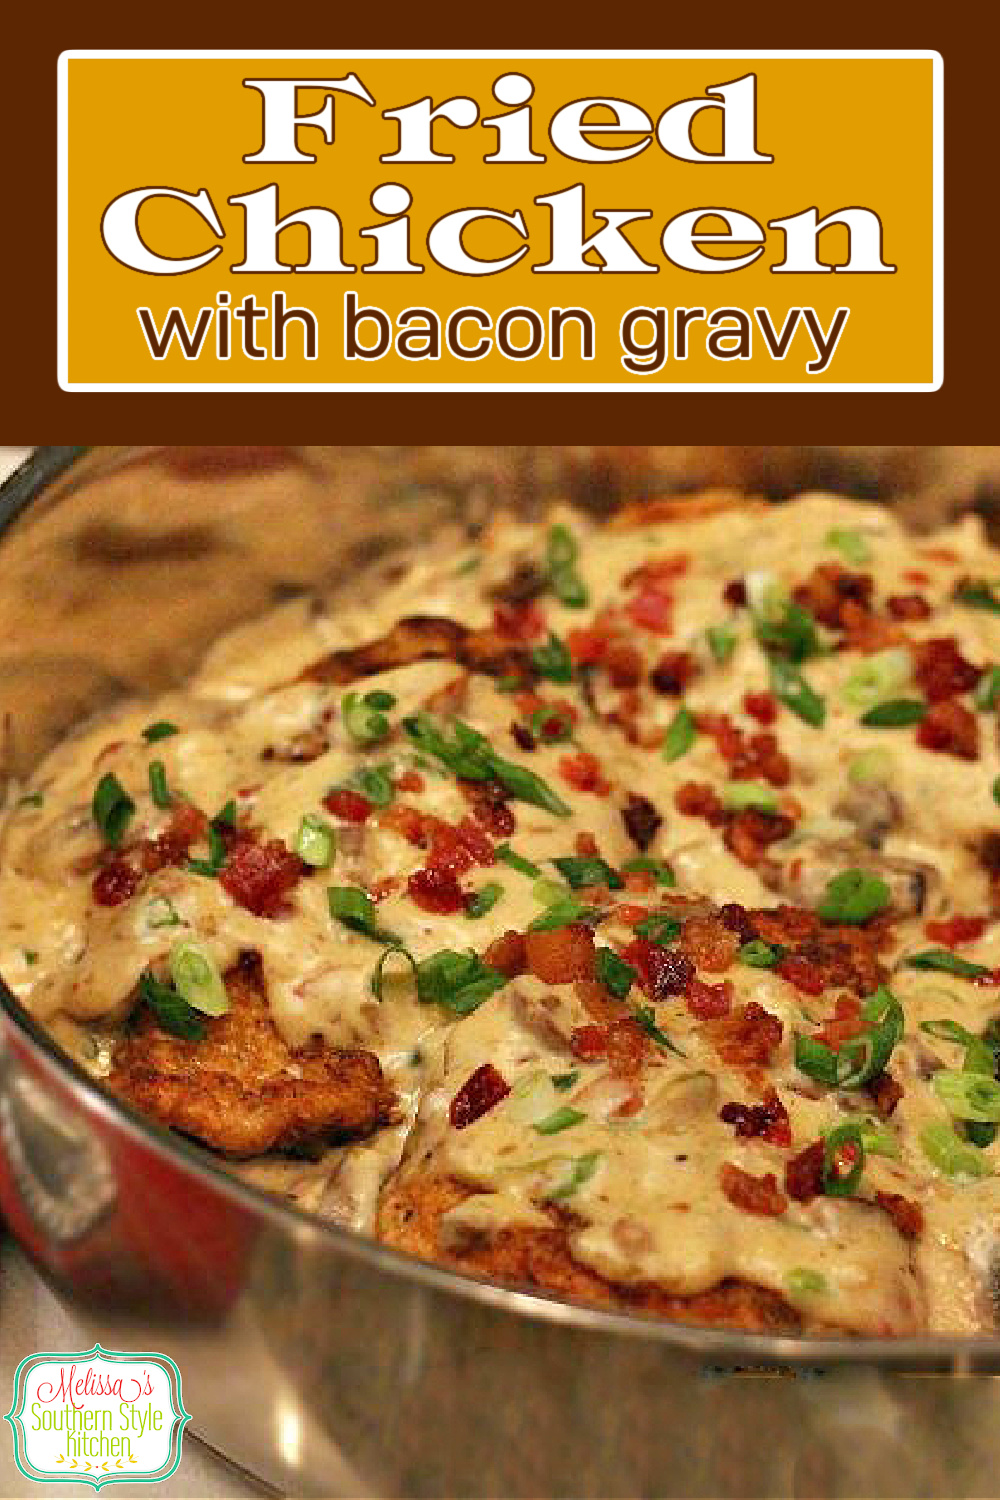 You can have this comforting Skillet Fried Chicken with Bacon Gravy on the table in no time flat #friedchicken #chickenandgravy #bacongravy #chickenrecipes #easychickenbreastrecipes #dinner #dinnerideas #southernfood #southernrecipes via @melissasssk